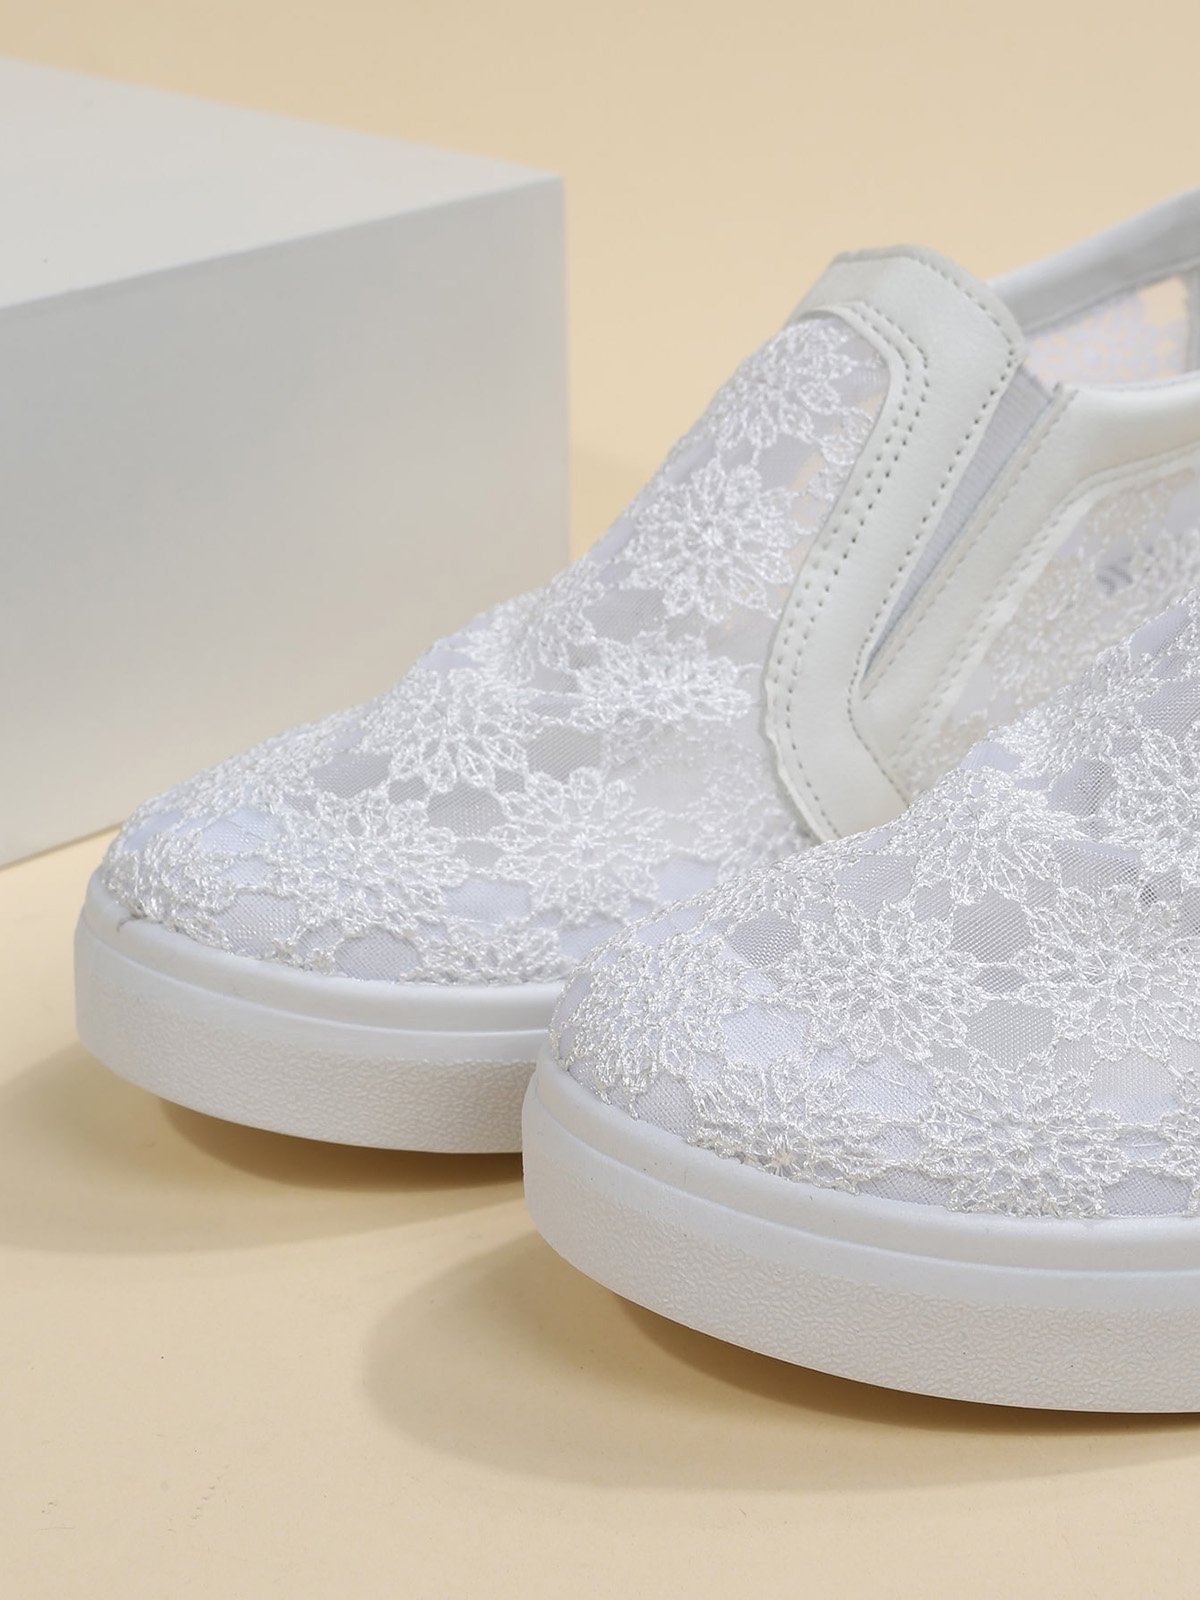 Flower Embroidery Lace Detail Hidden Heeled Shoes